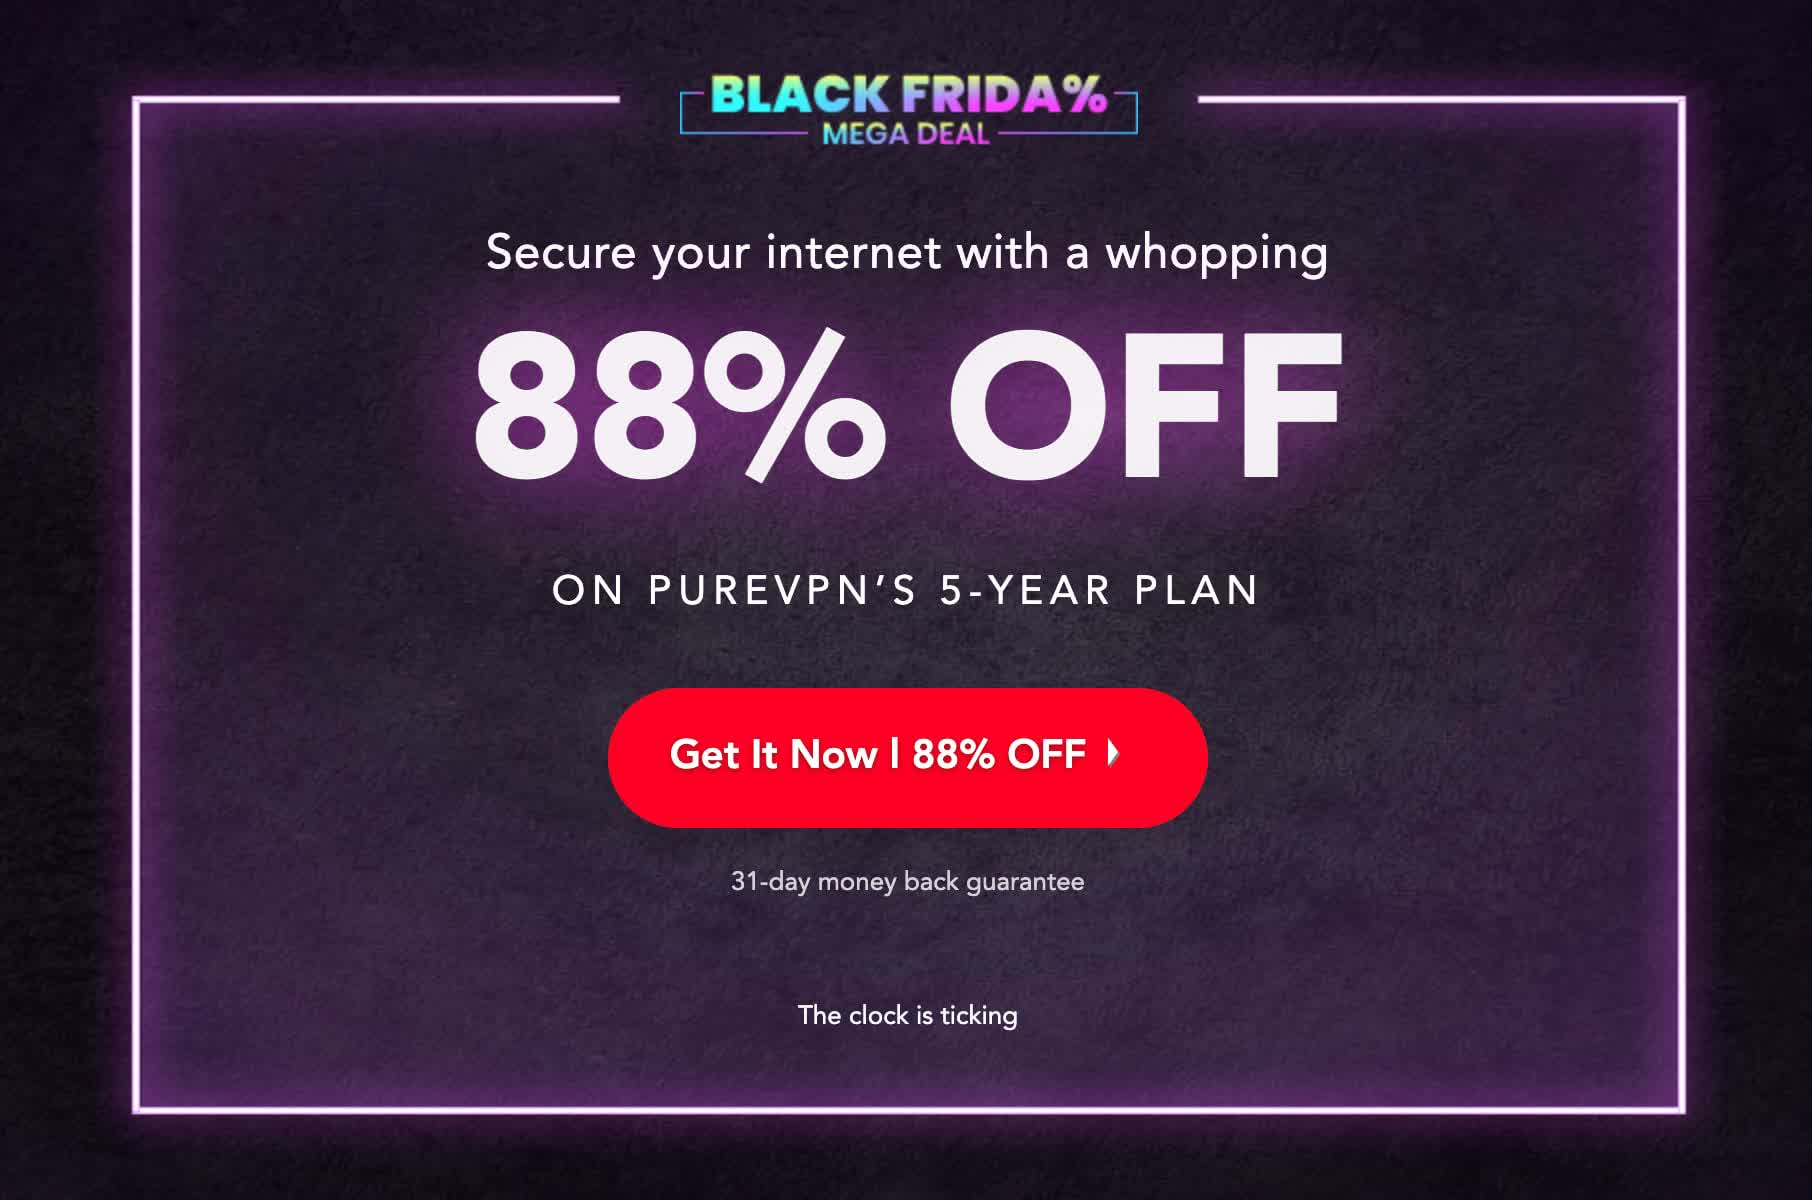 Time to grab this PureVPN deal: Up to 88% off